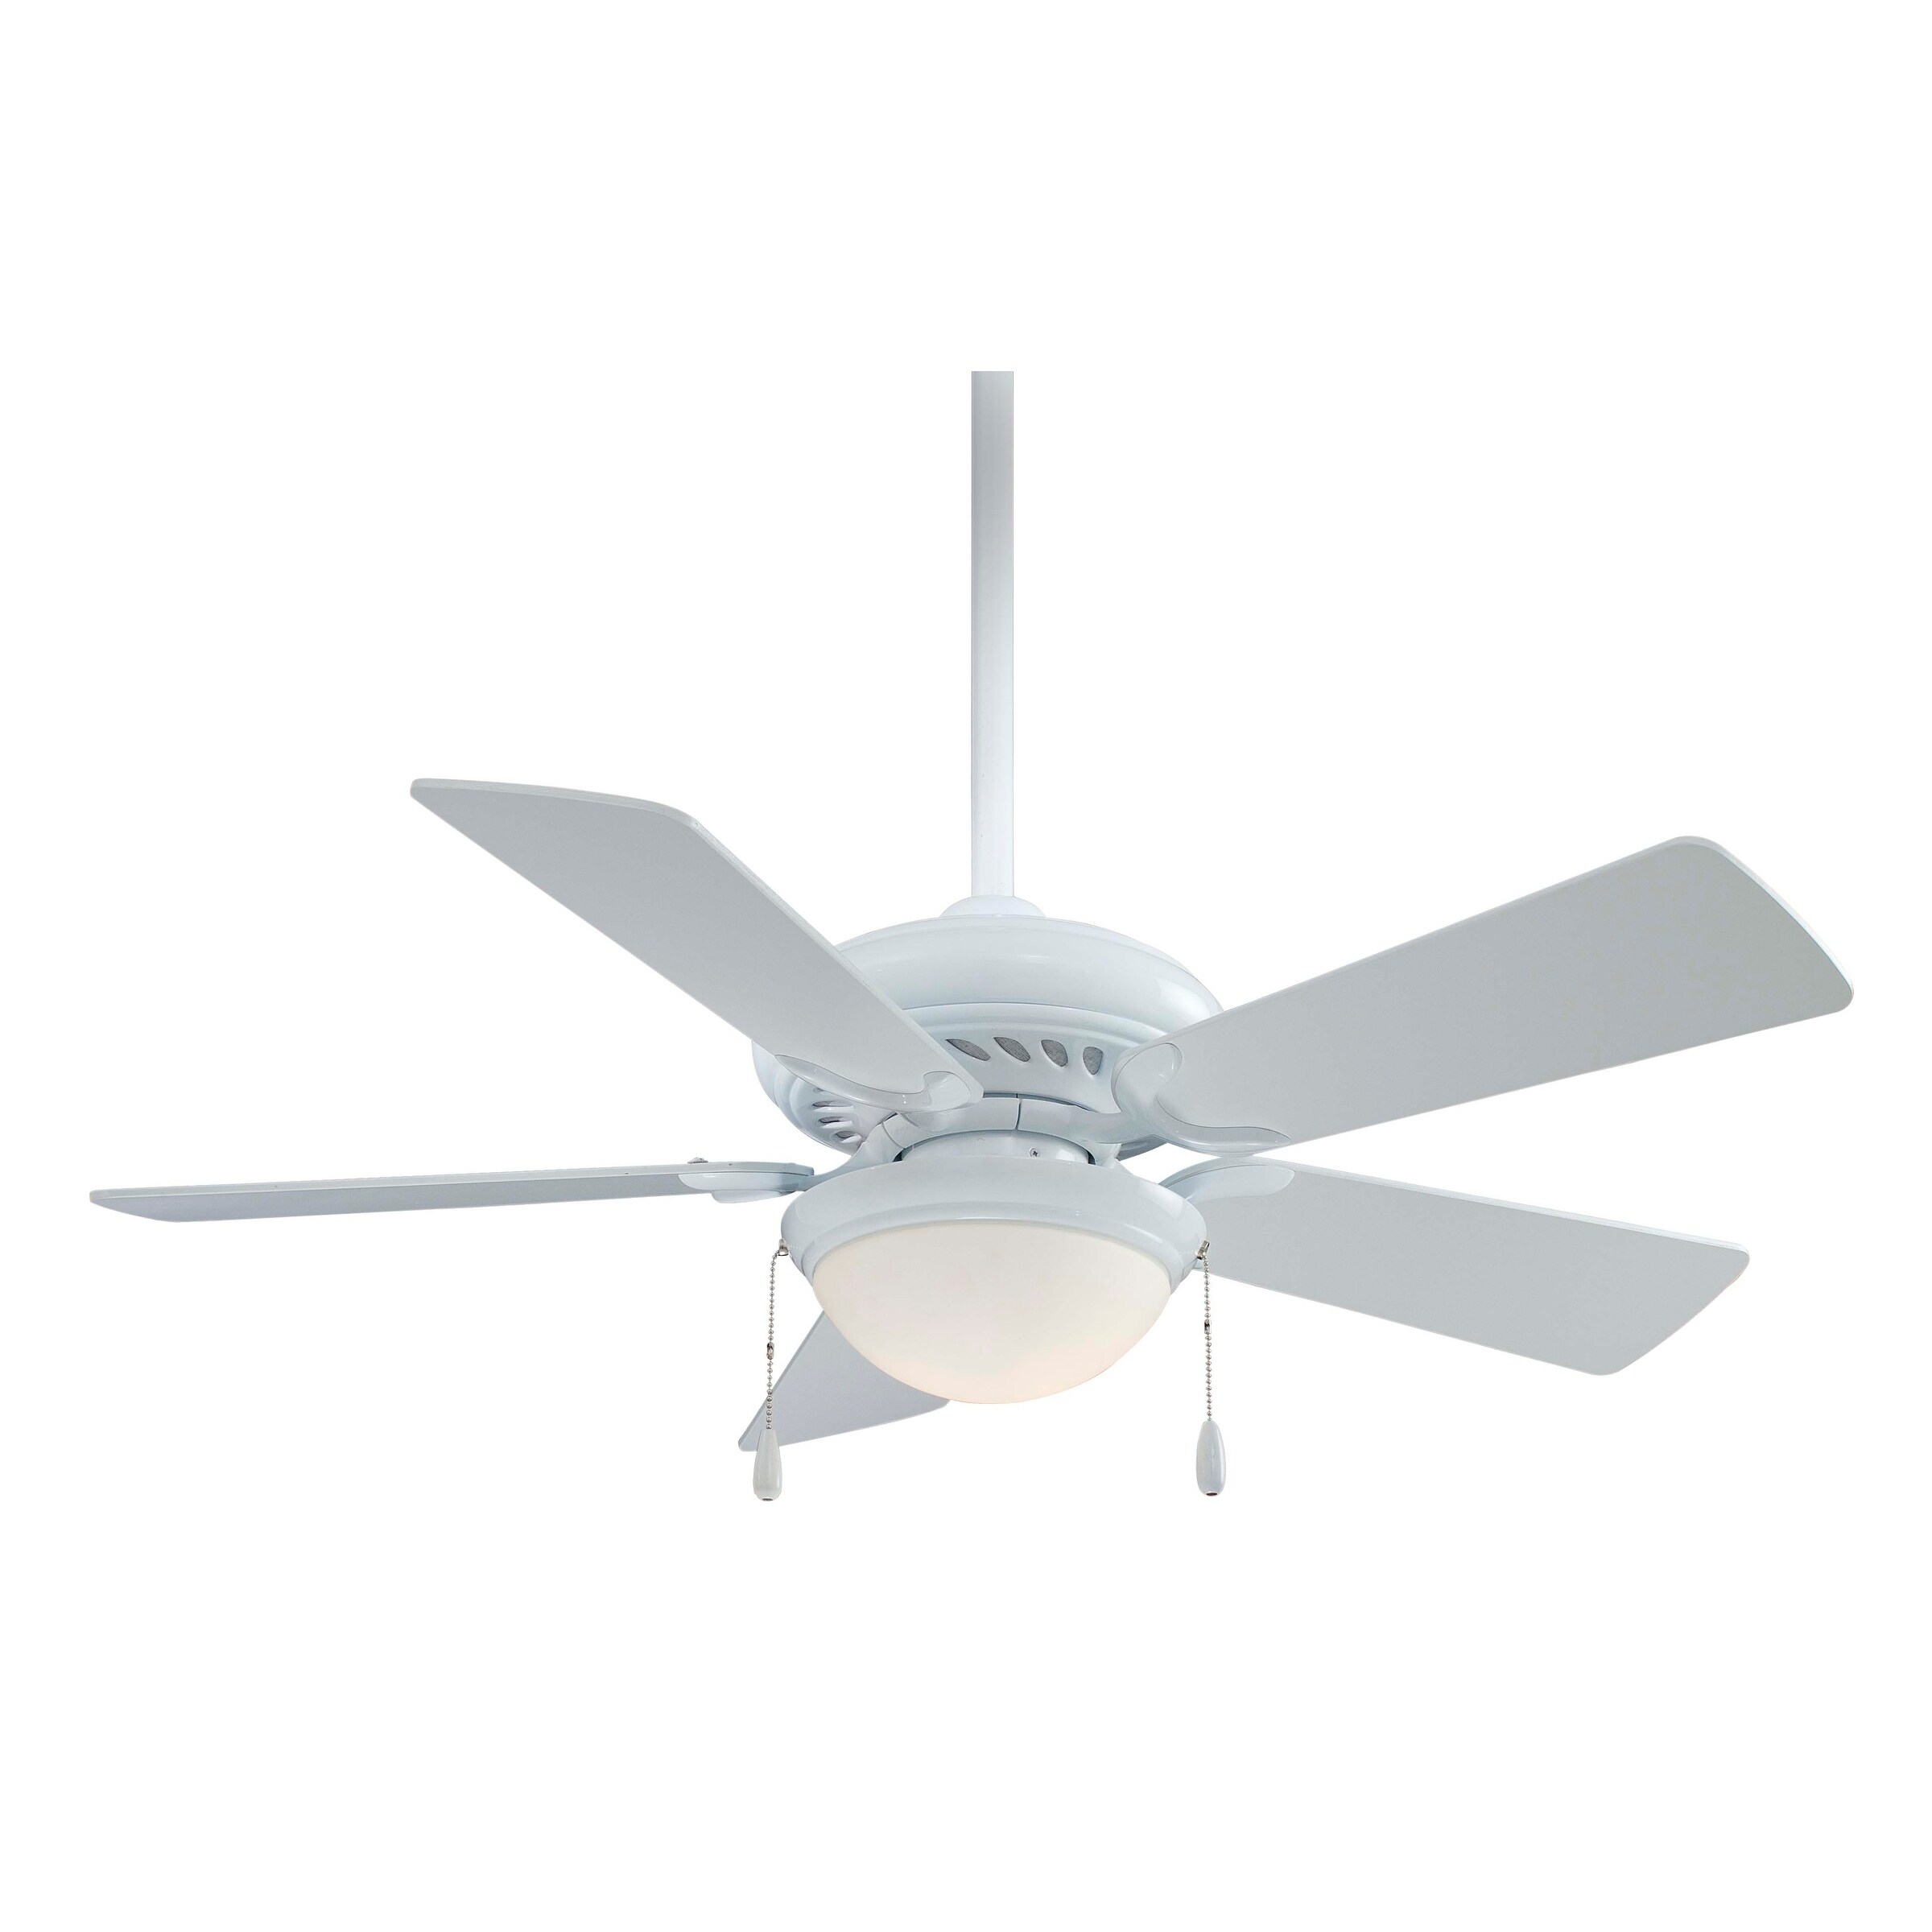 Shop Supra 44 Ceiling Fan In White Finish W White Blades By